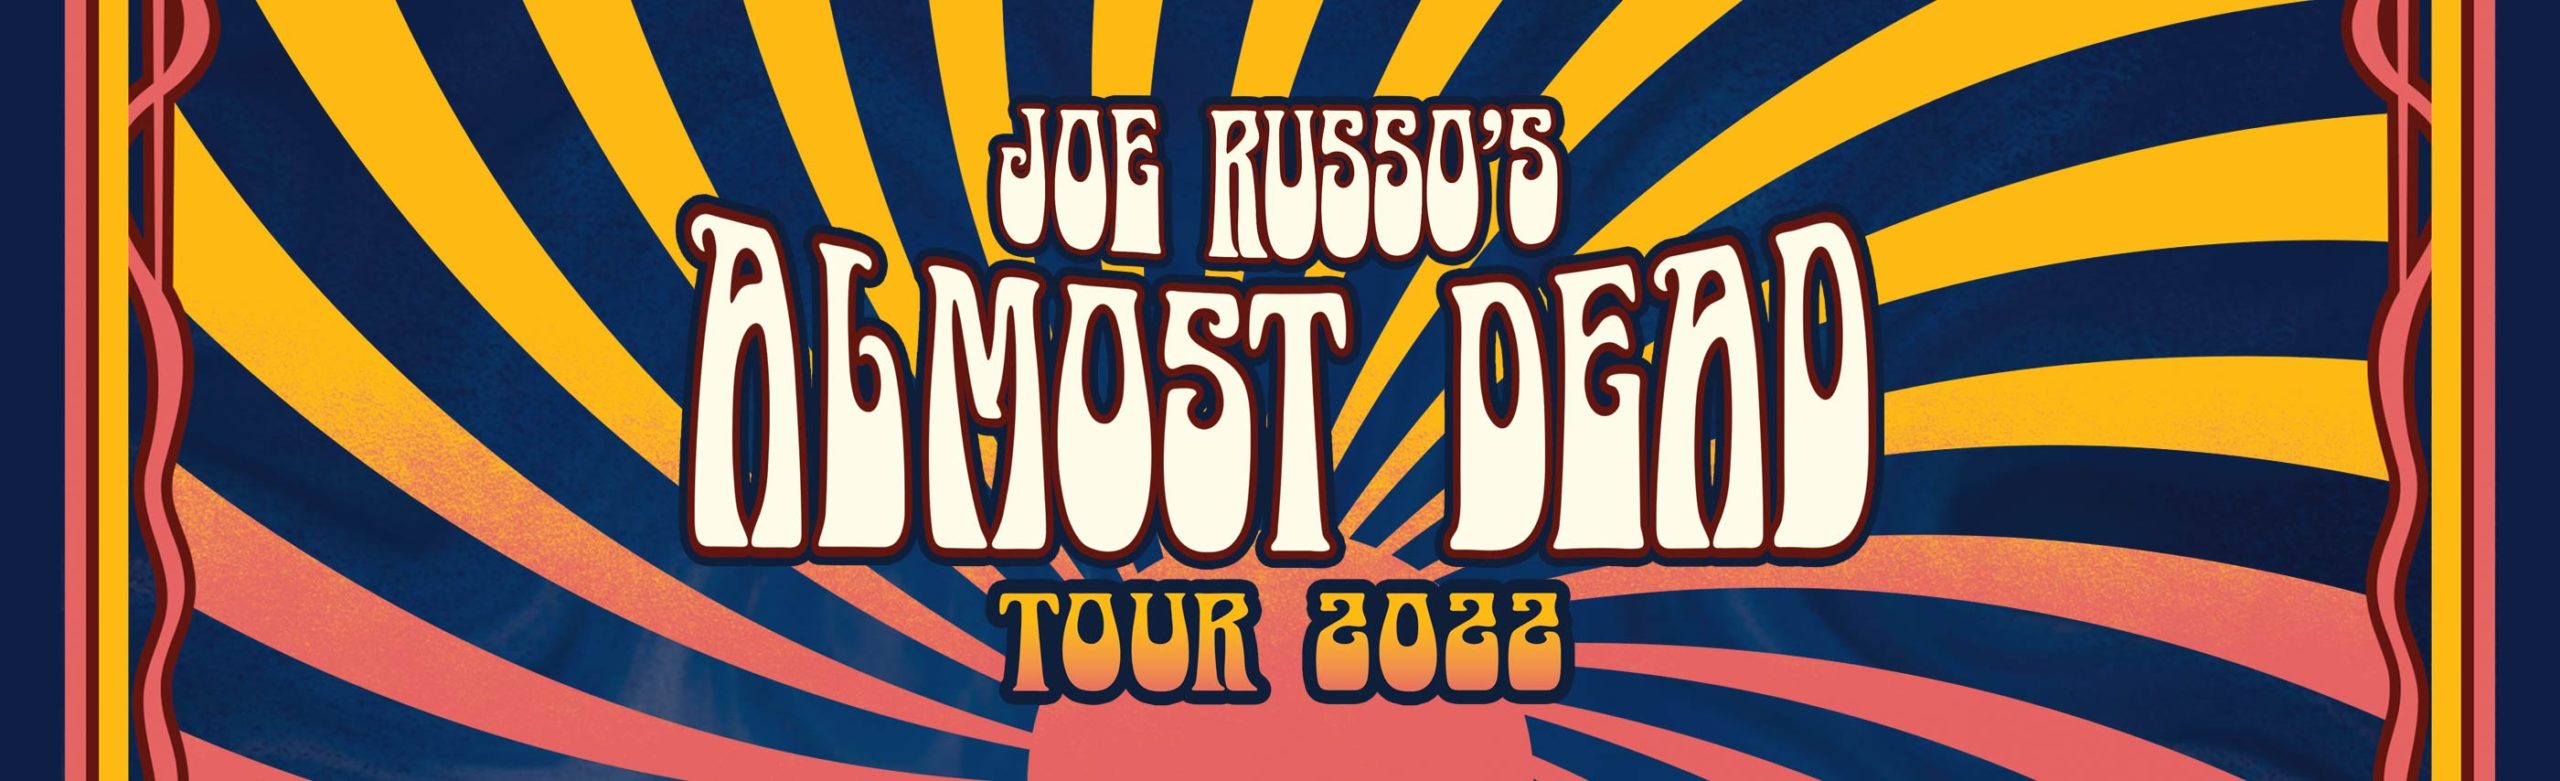 Event Info: Joe Russo’s Almost Dead at KettleHouse Amphitheater 2022 Image